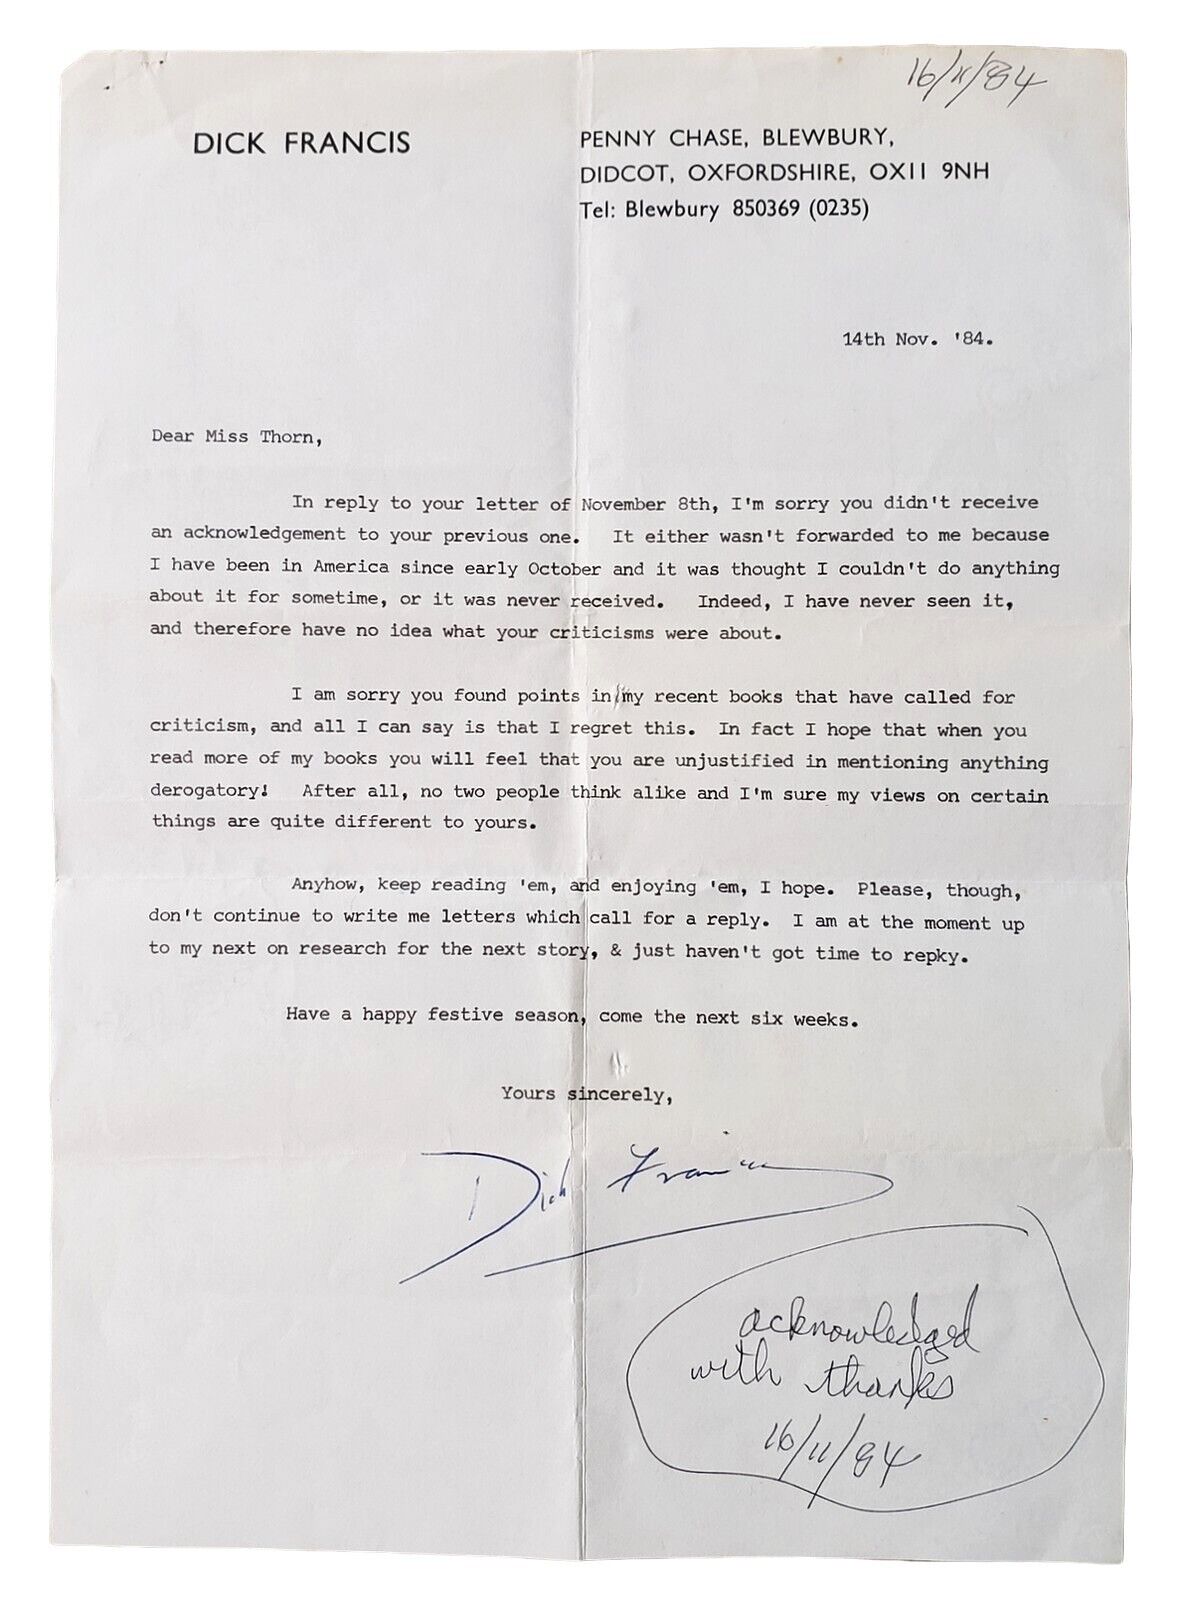 Dick Francis SIGNED letter to critical reader, British crime author, 1984 TLS